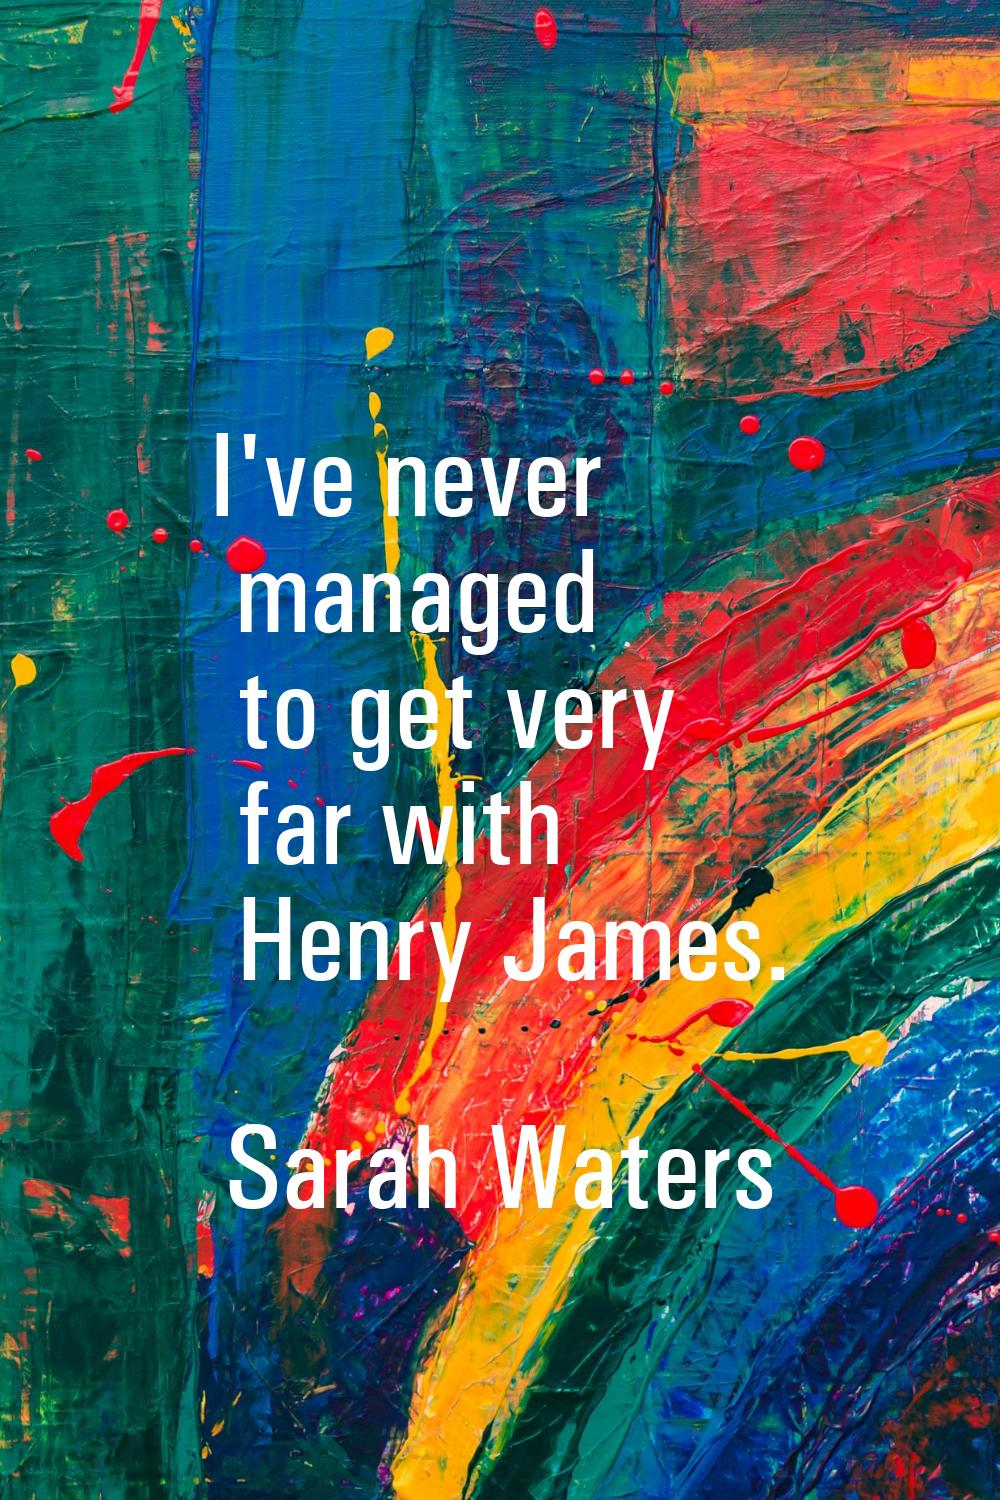 I've never managed to get very far with Henry James.